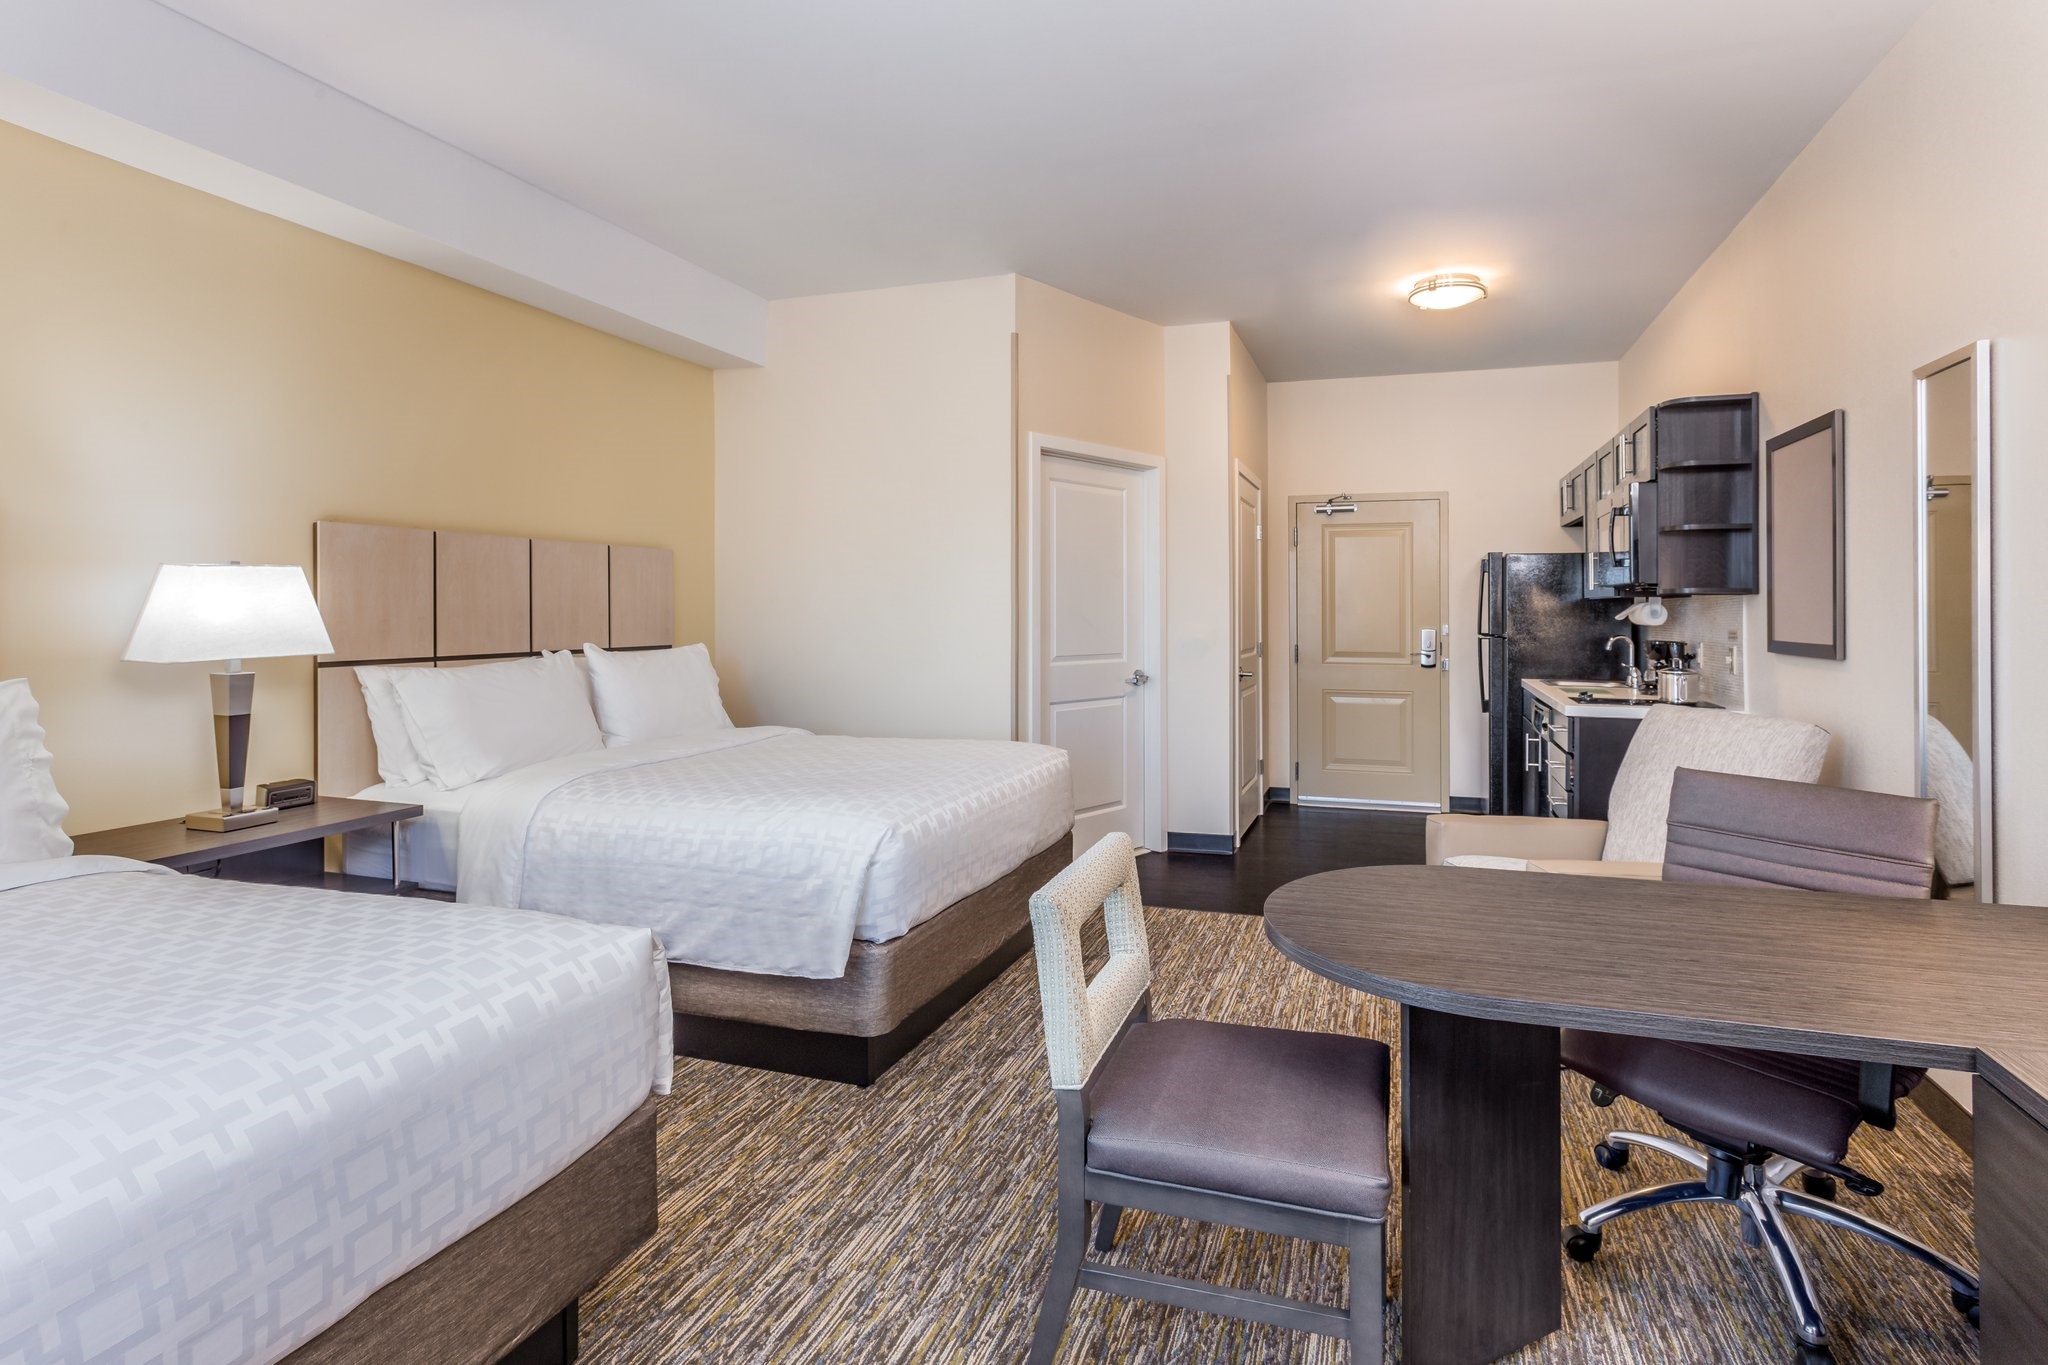 Meeting Rooms at Candlewood Suites BETHLEHEM SOUTH, 1630 SPILLMAN DRIVE